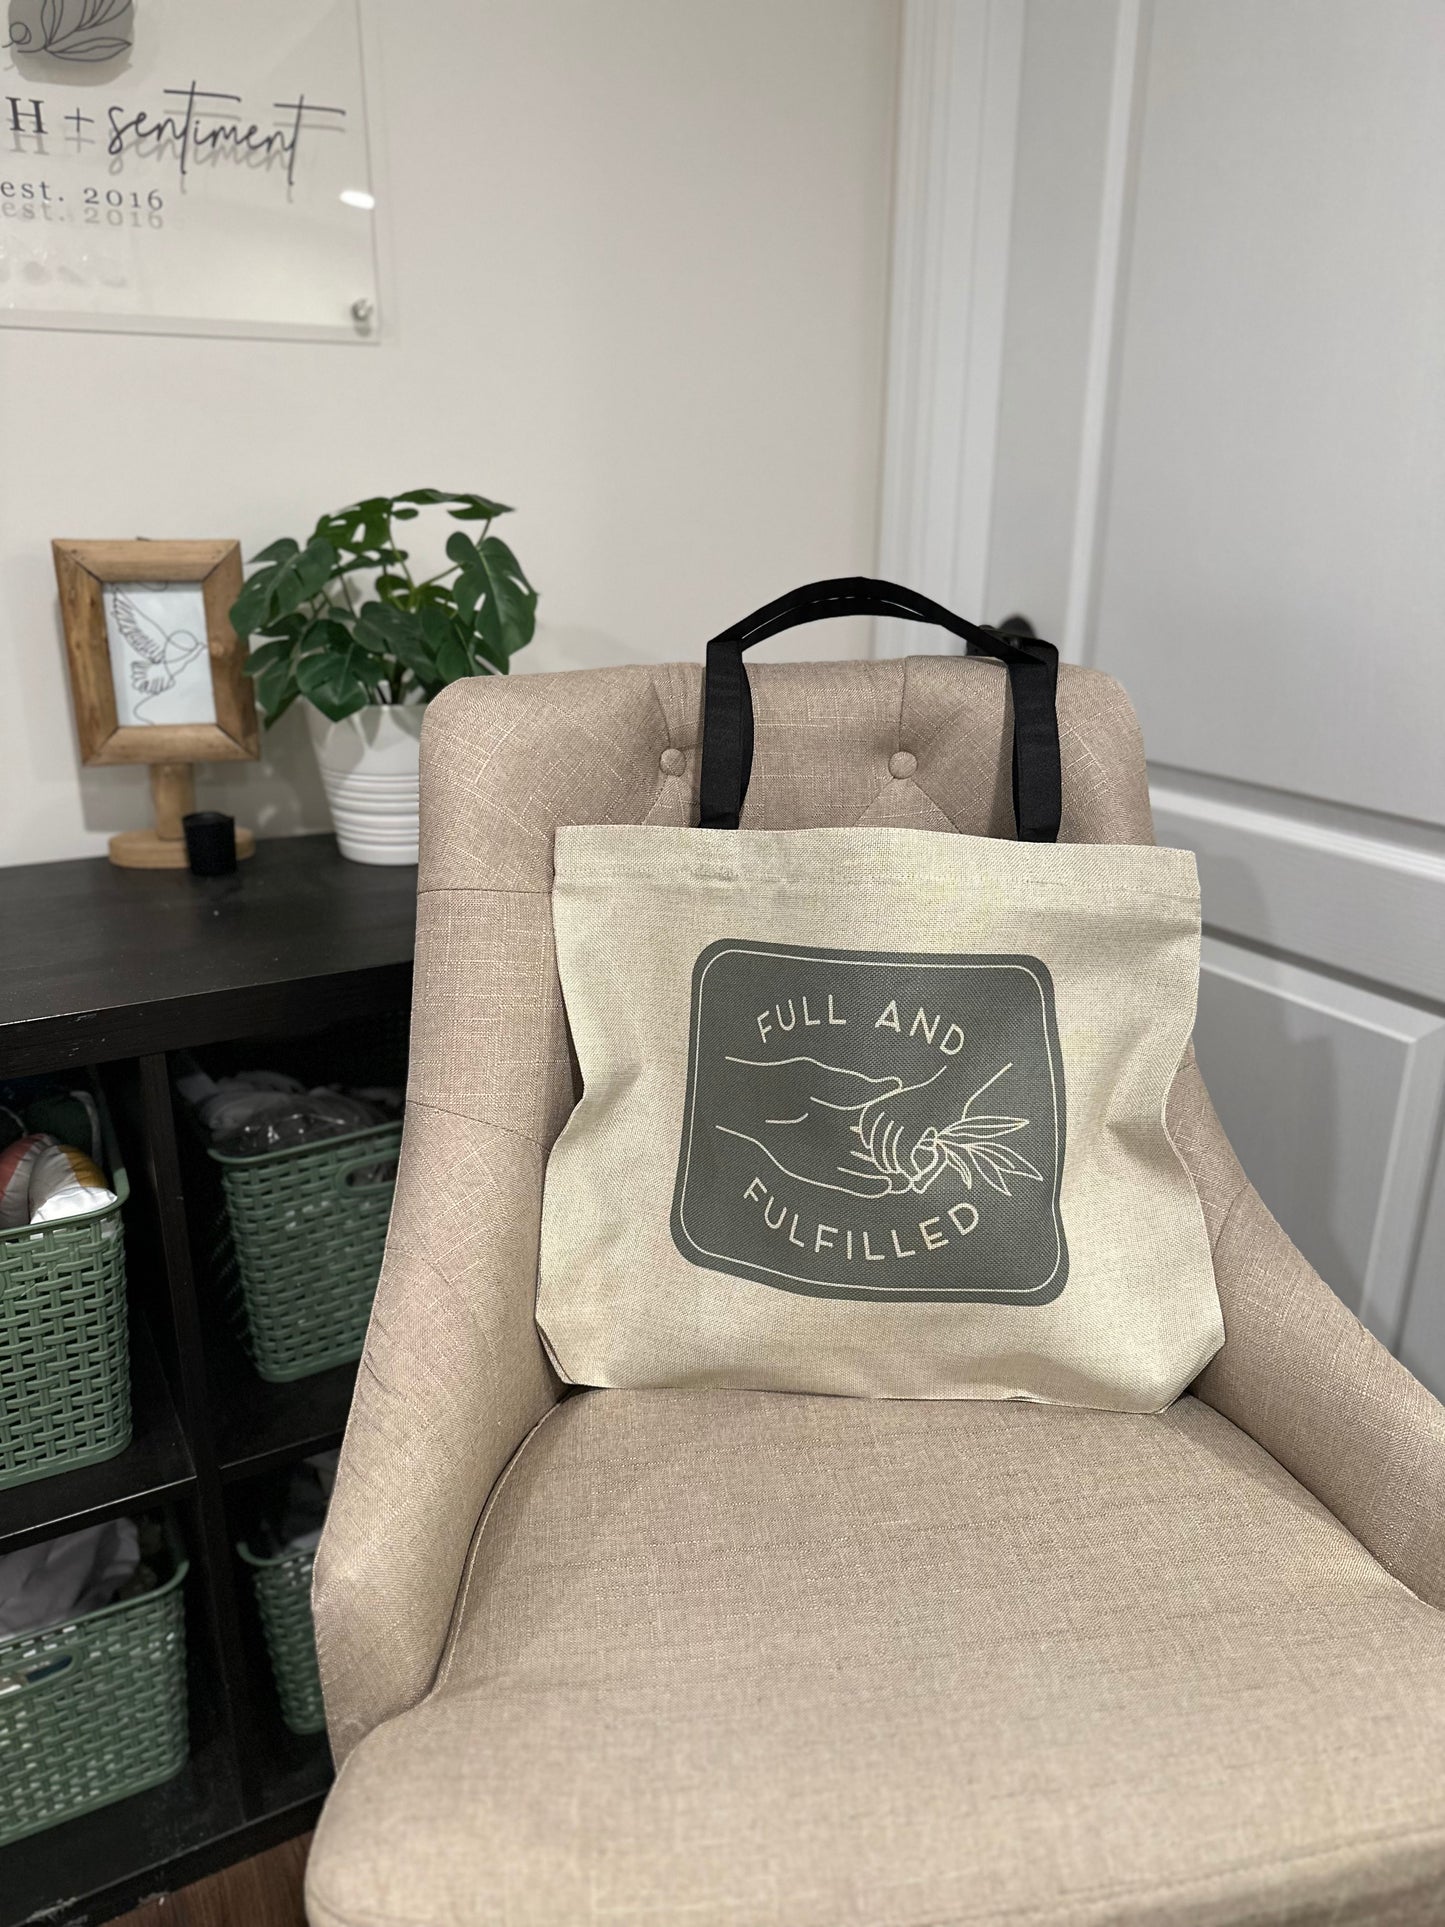 Full and Fulfilled Tote Bag